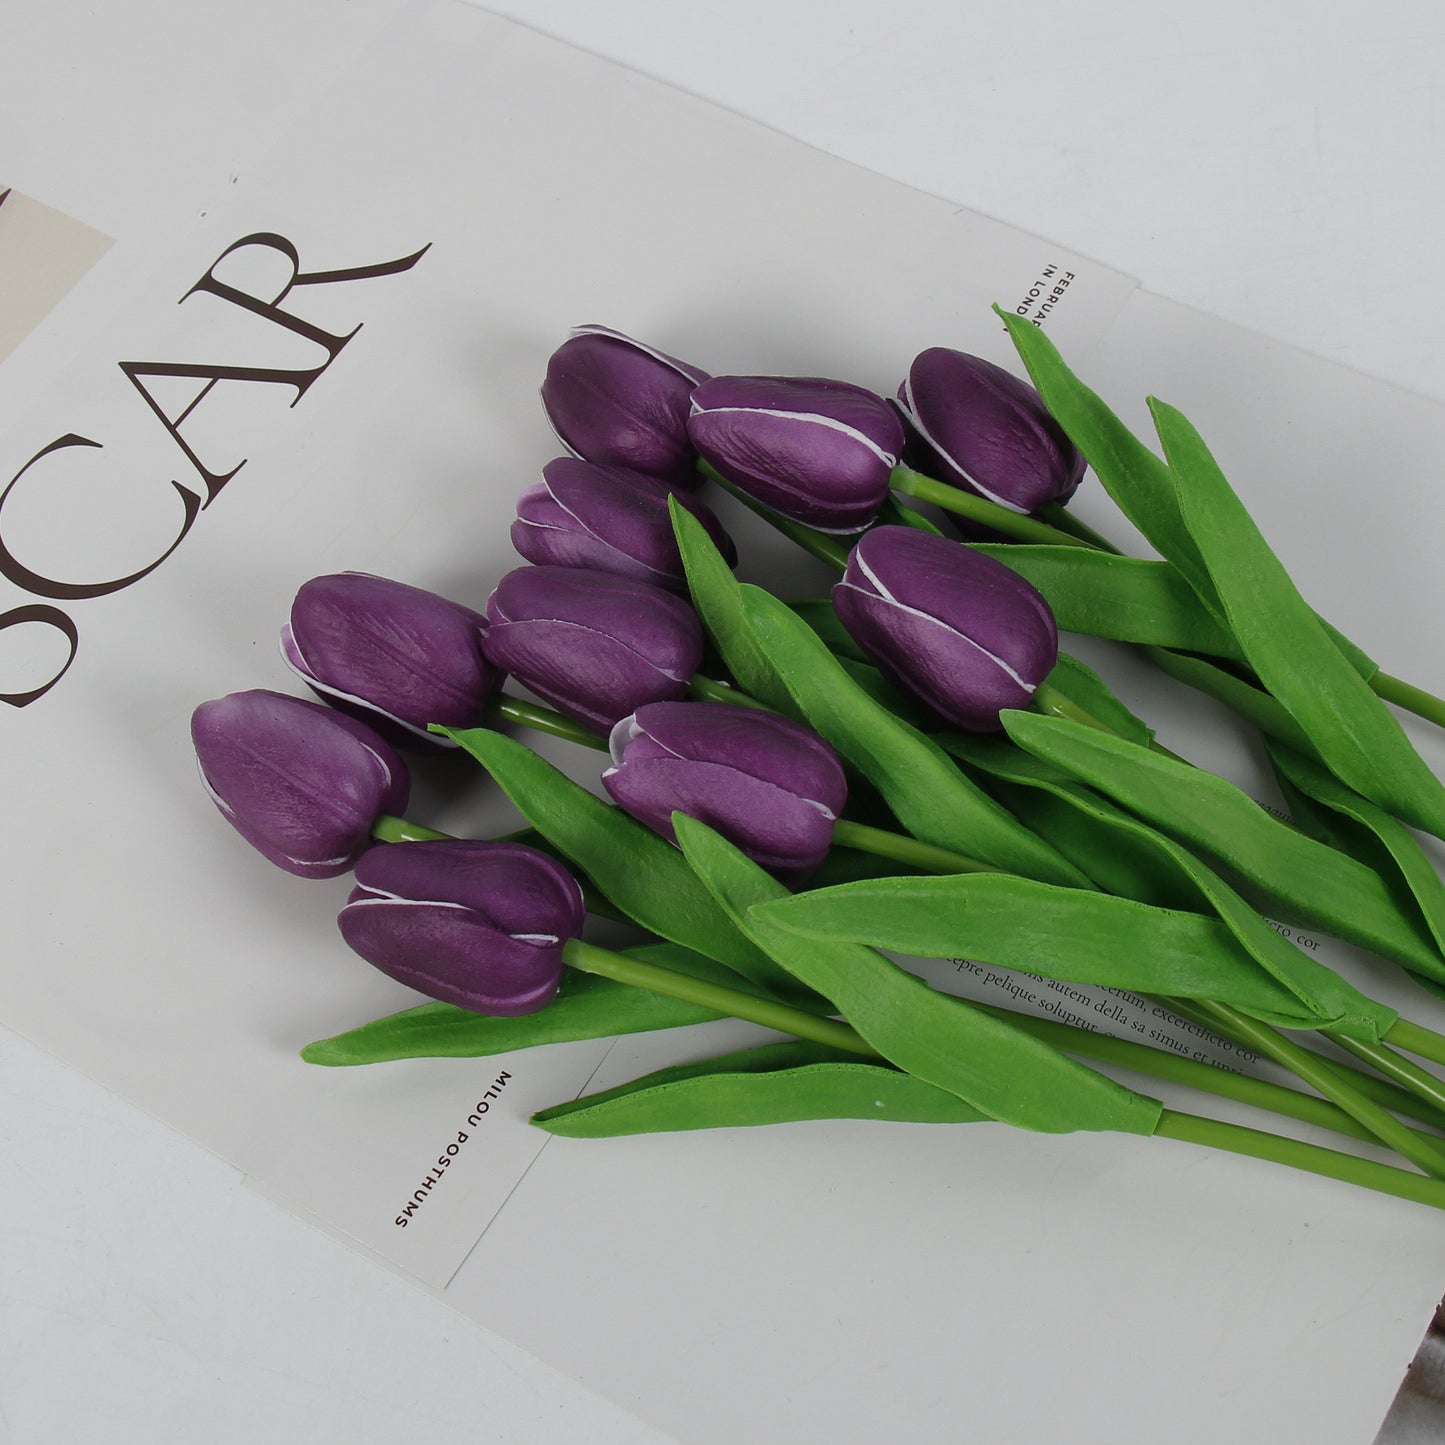 Artificial Tulip Bouquet 10pcs - 12.99 inches PU Tulip Fake Flower Decoration, Suitable for Room, Office Table, Party, Wedding, Home Decoration; Available in a Variety of Colors